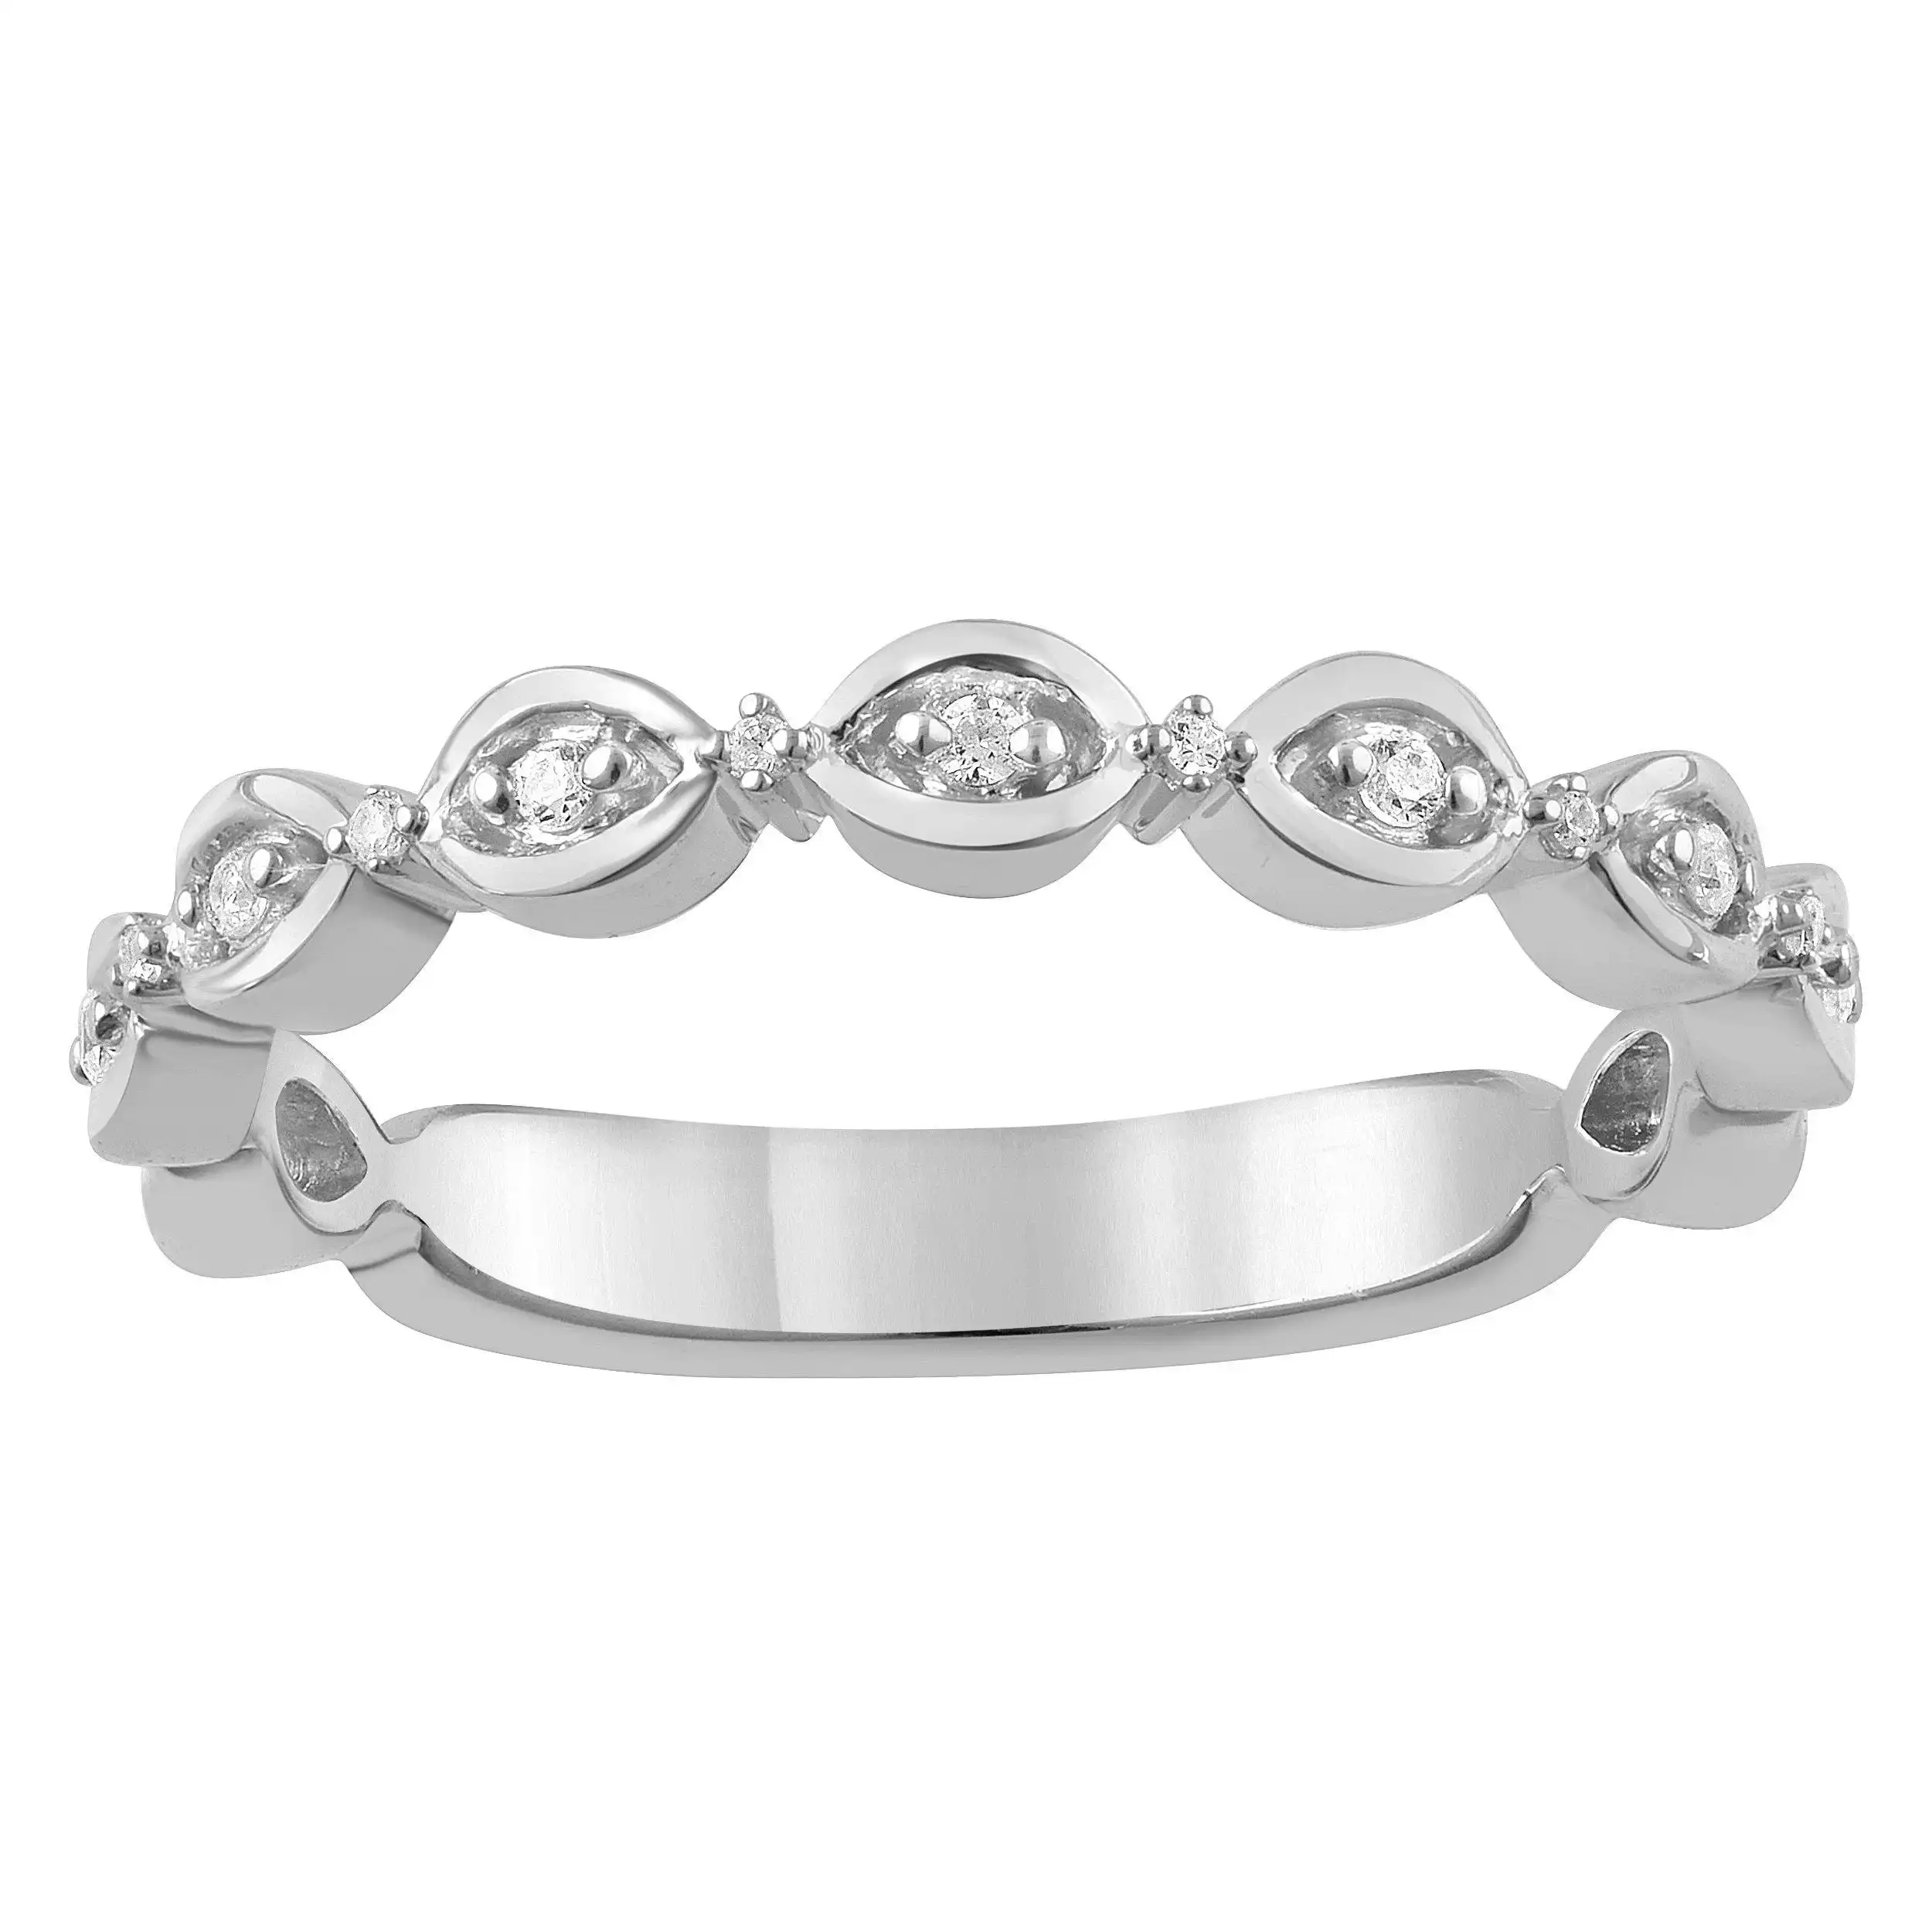 Diamond Oval Shape Stacklabe Ring in Sterling Silver